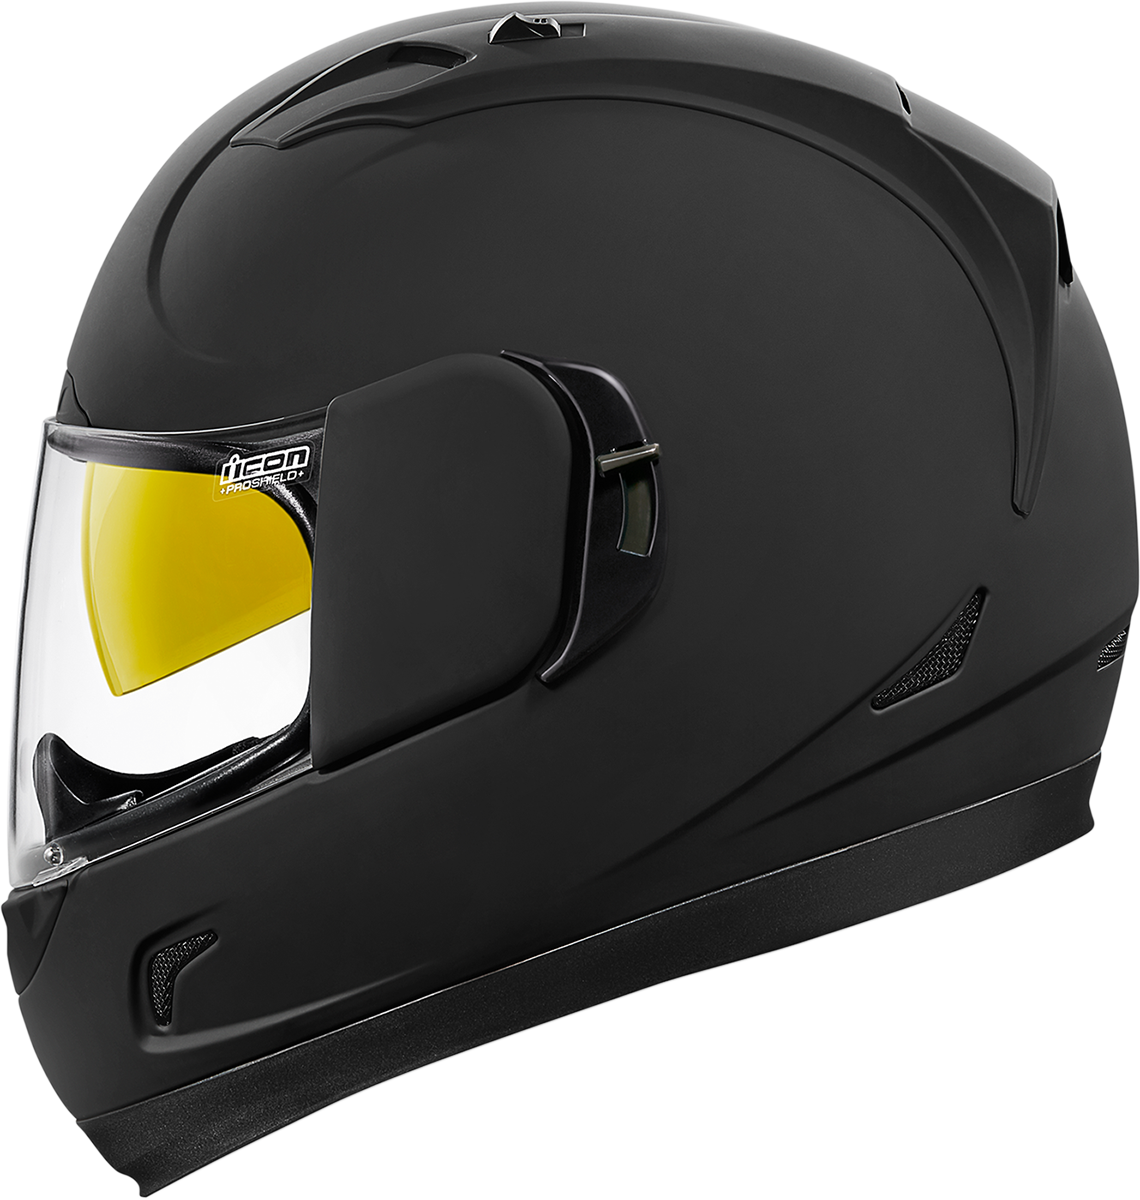 A Black Motorcycle Helmet With Yellow Tinted Visor